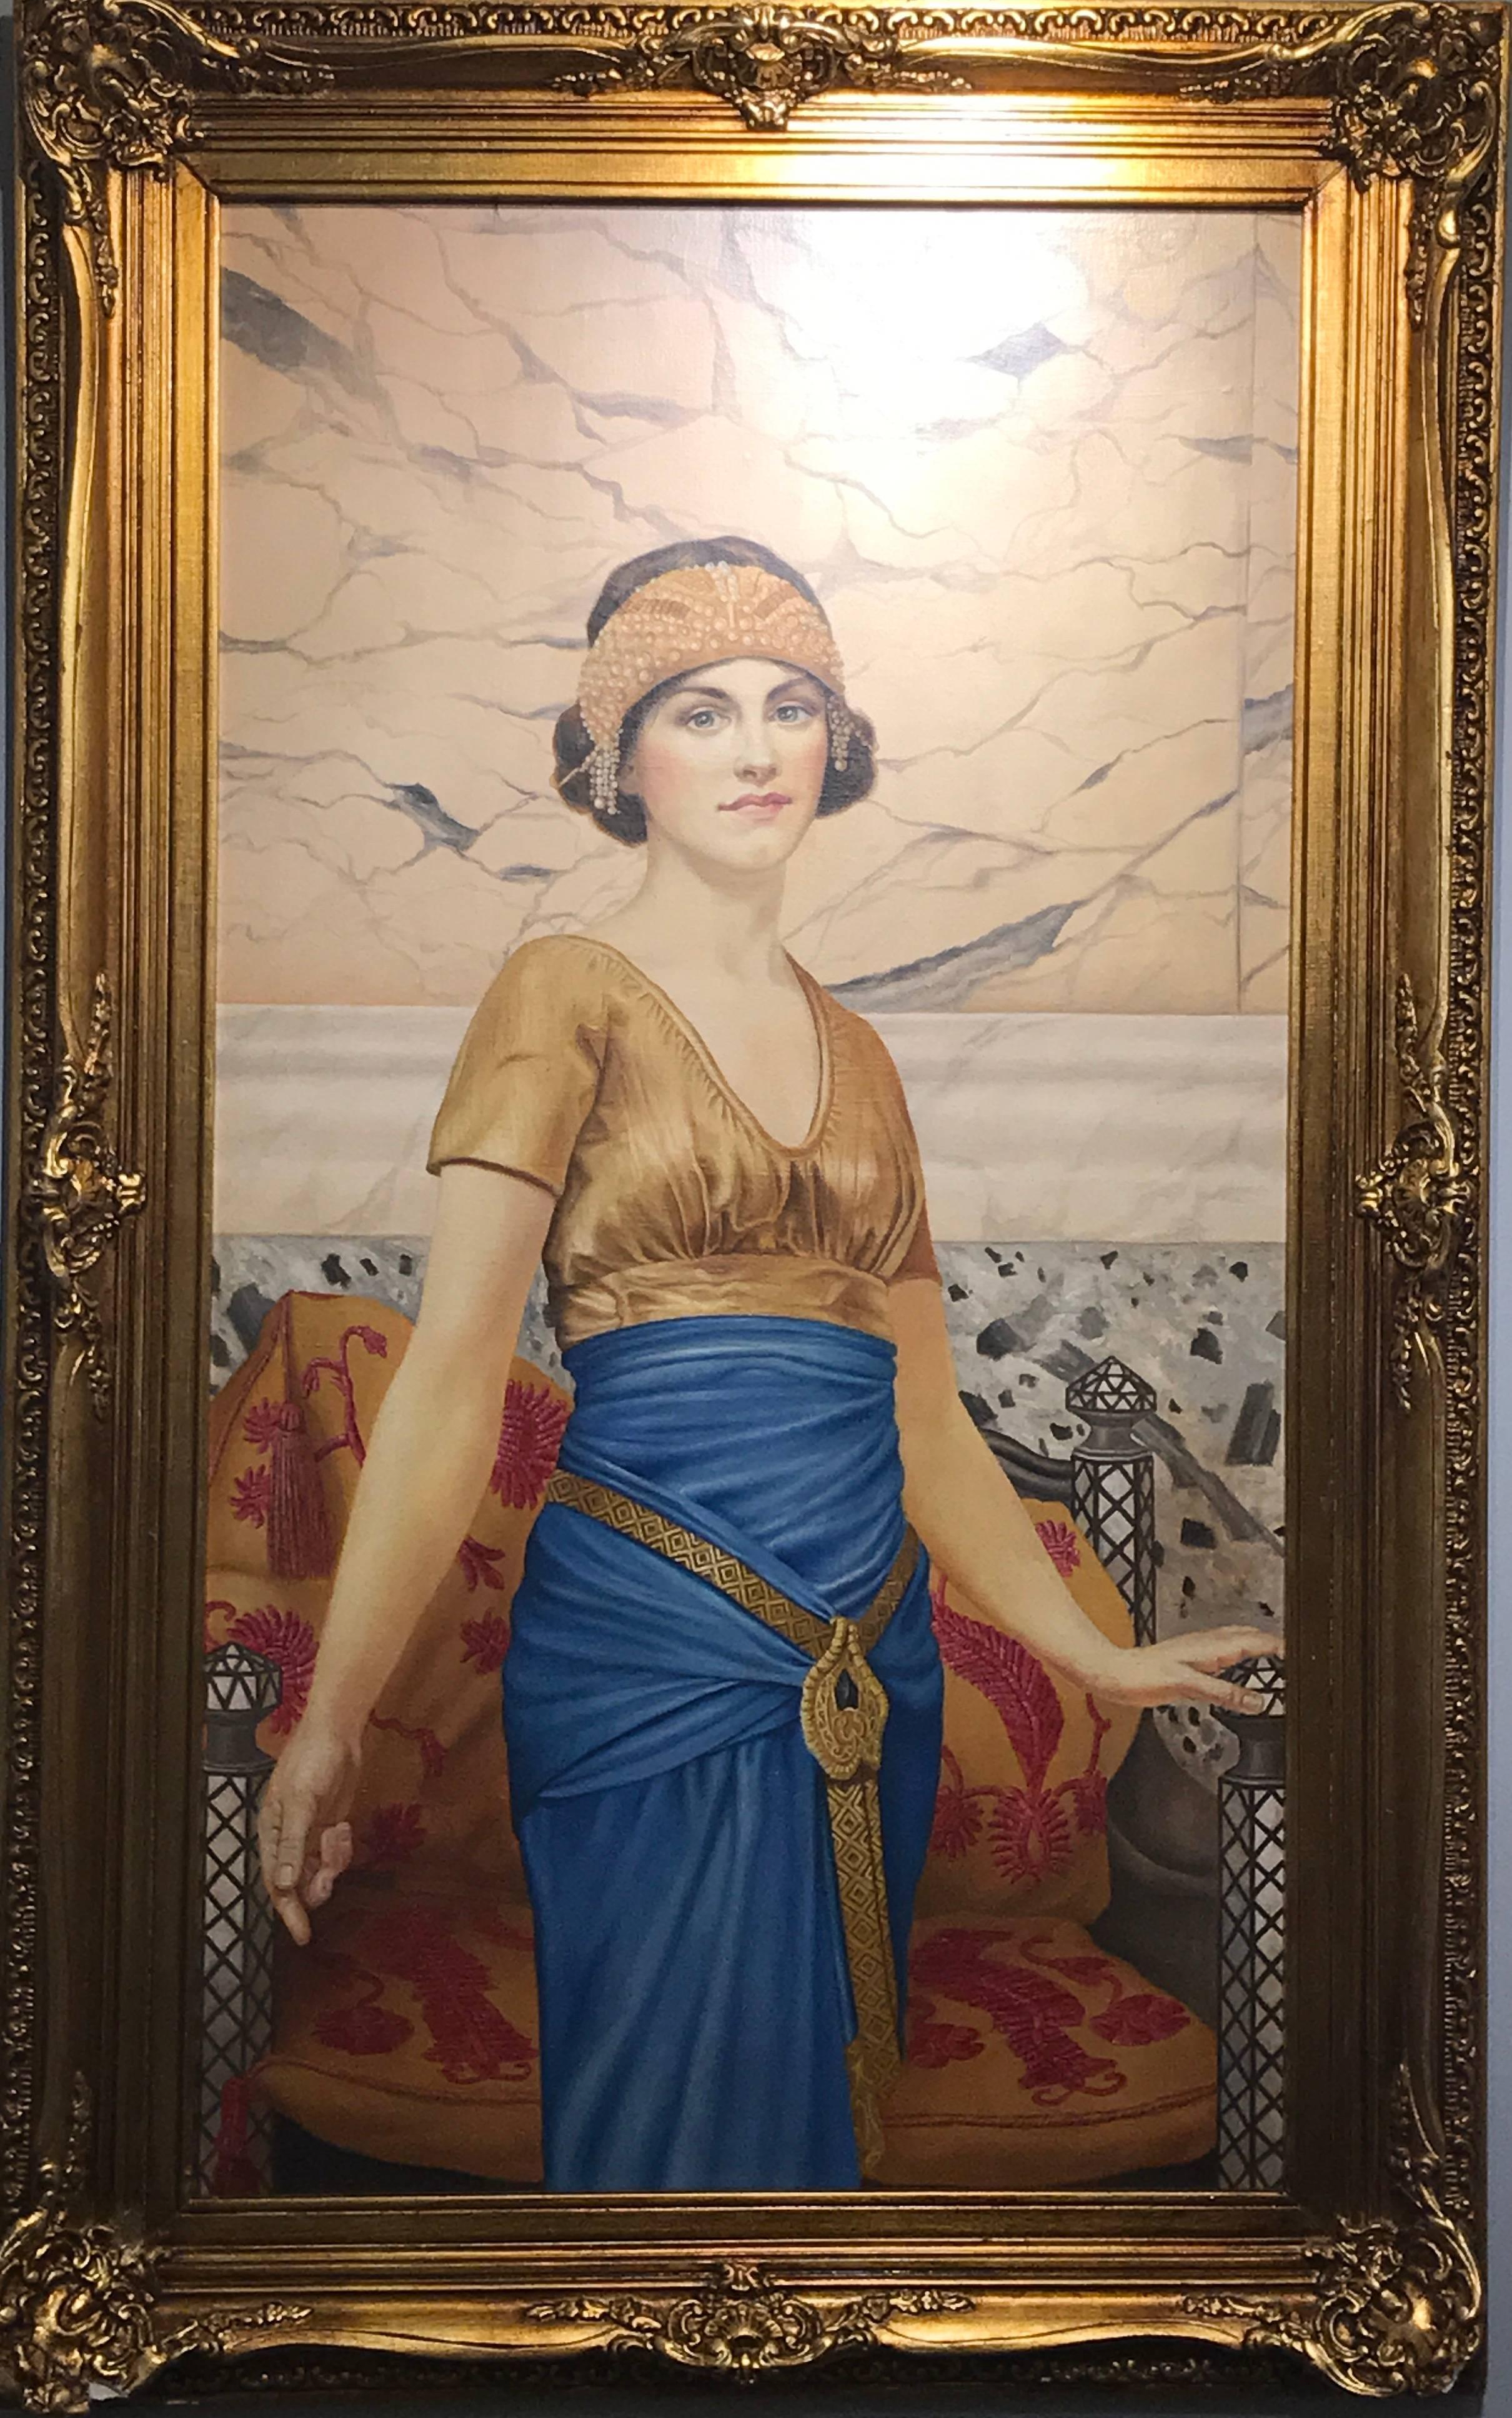 William Clarke Wontner Portrait Painting - Large Early 20th Century British Neo-Classical Oil Painting 